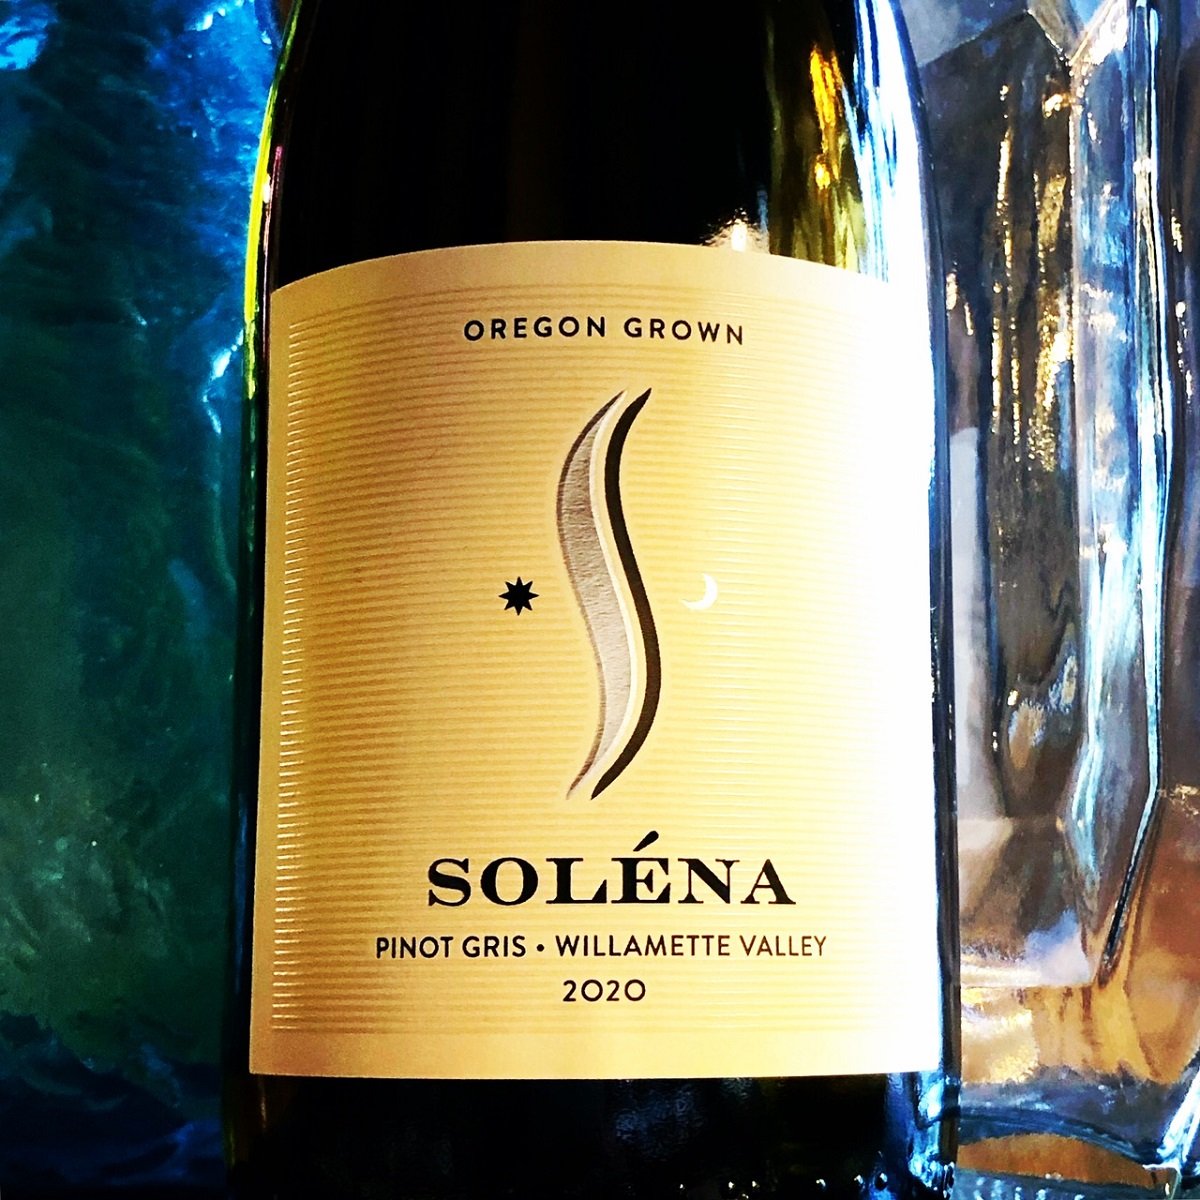 Label_OR_Solena Pinot Gris.jpg